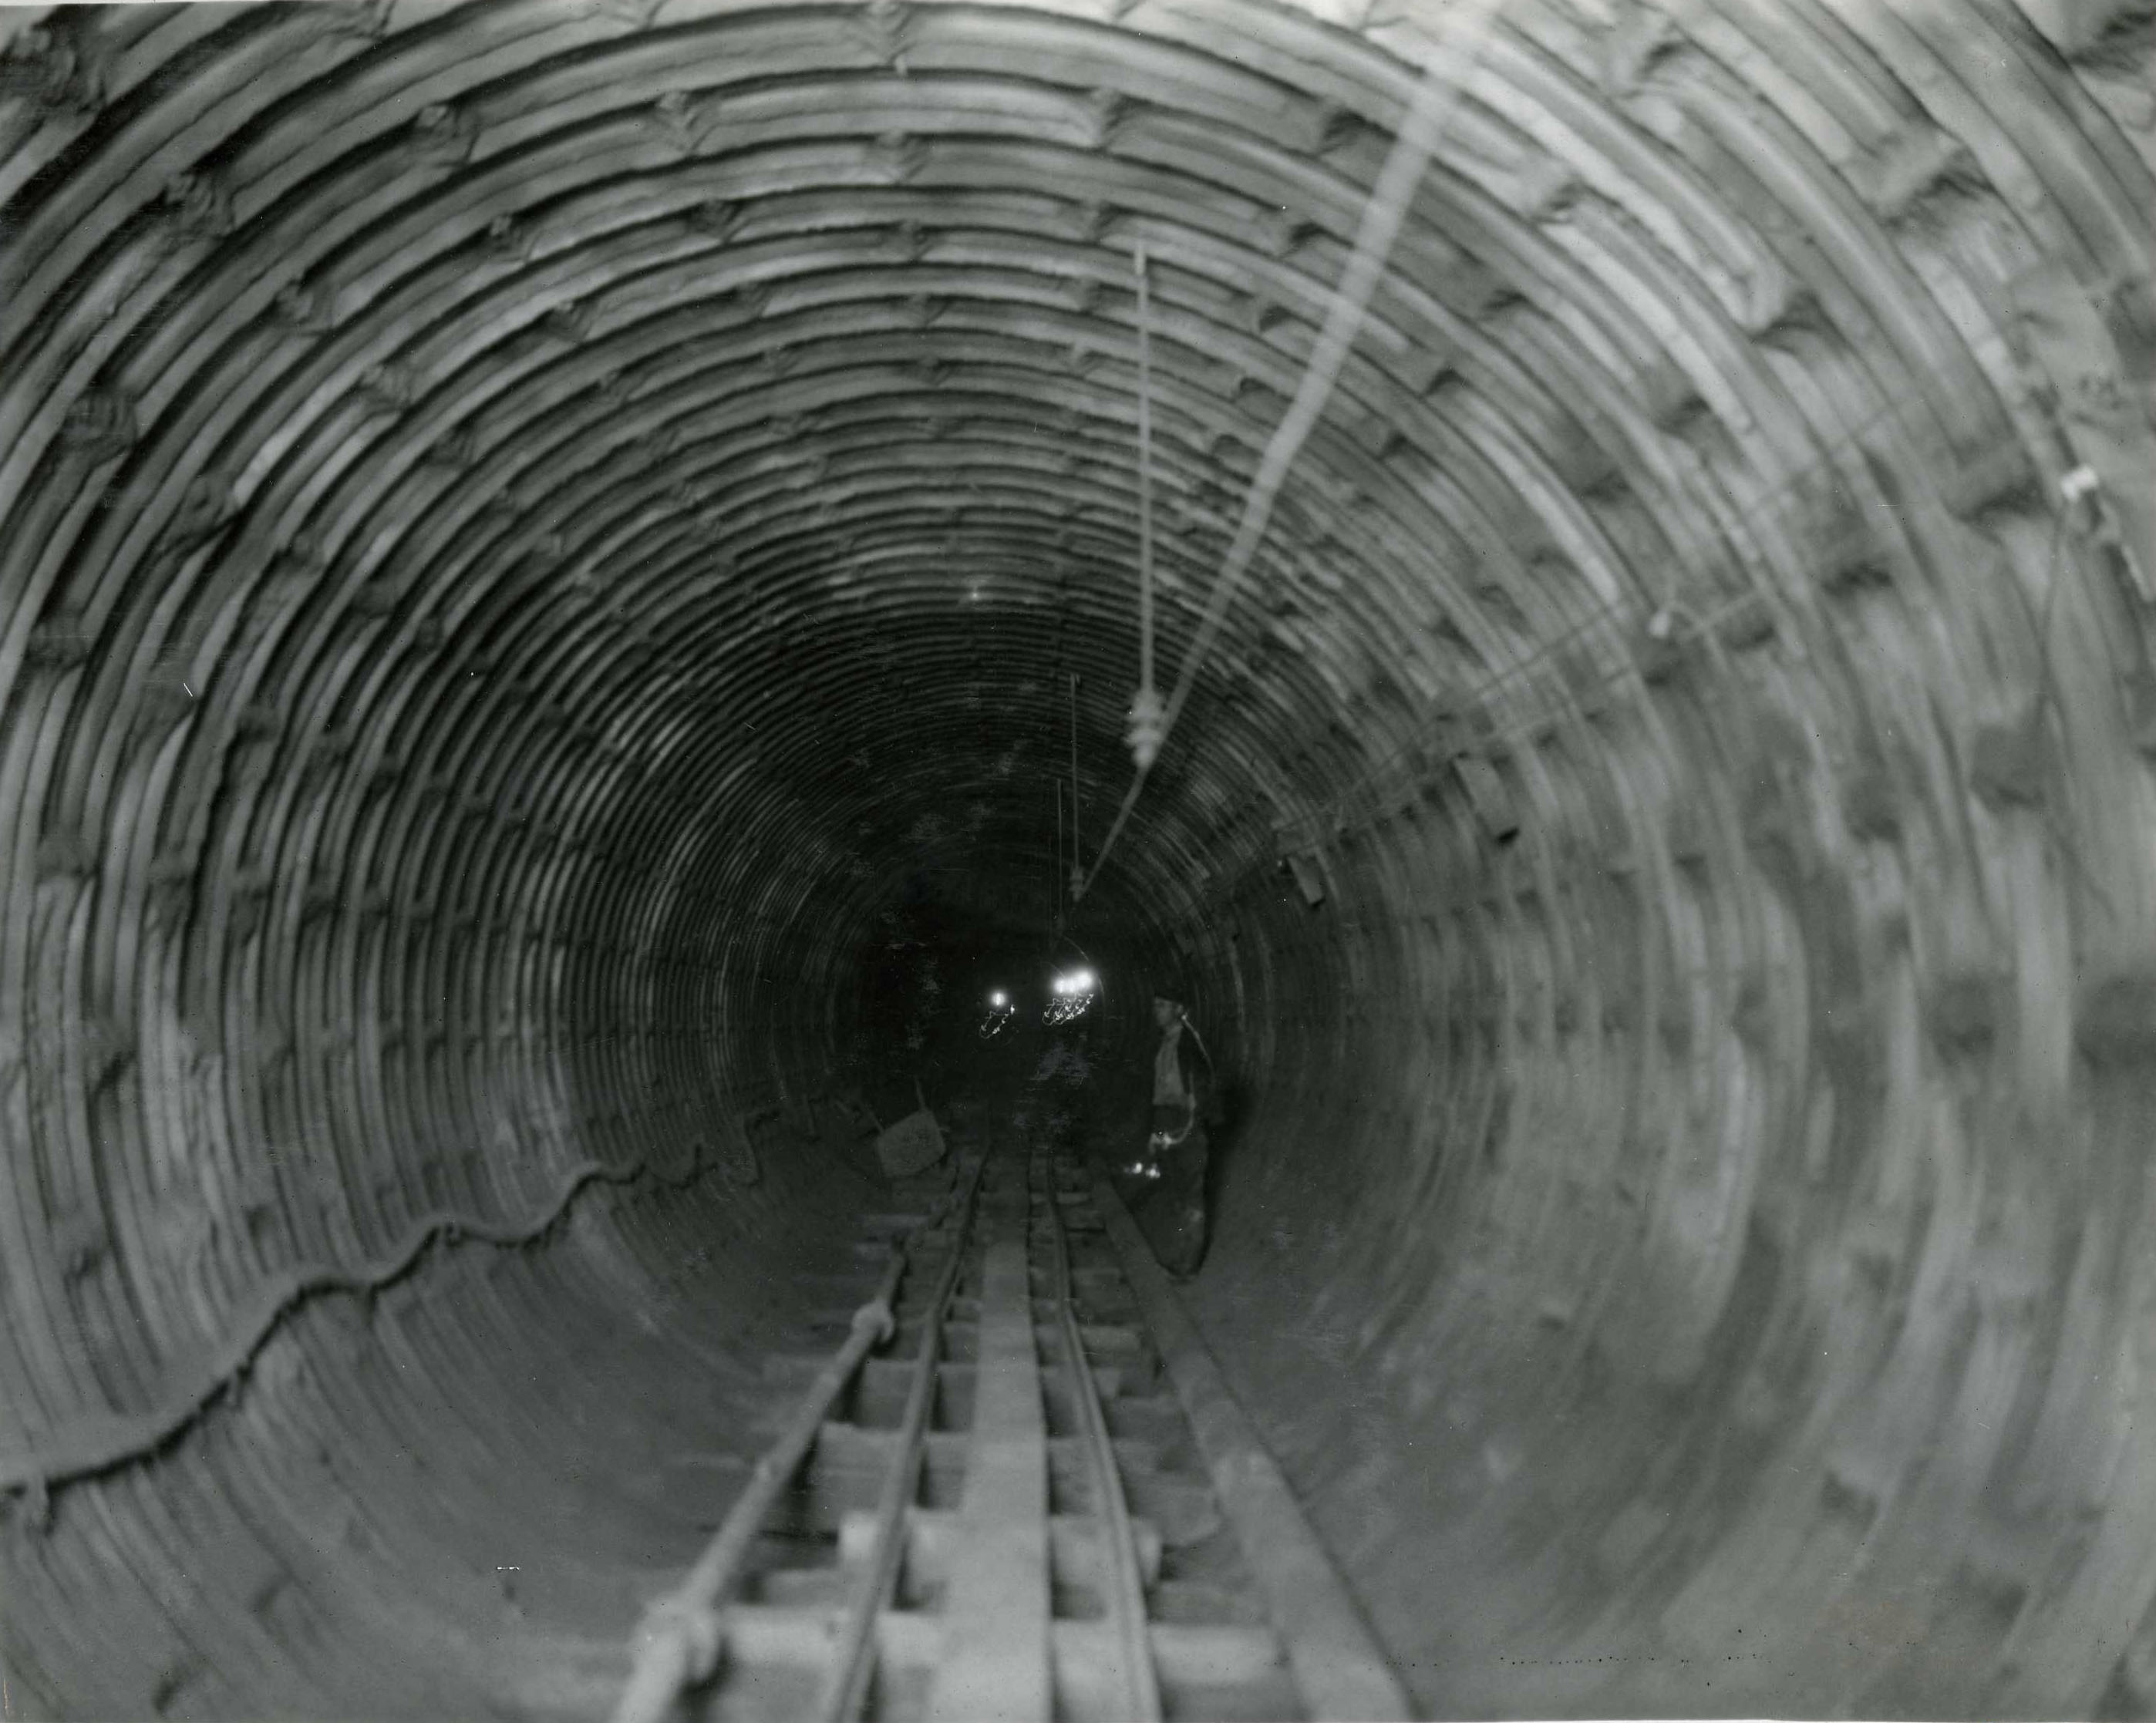 The Moffat water tunnel, partially lined with steel, can deliver up to 100,000 acre-feet of water annually.